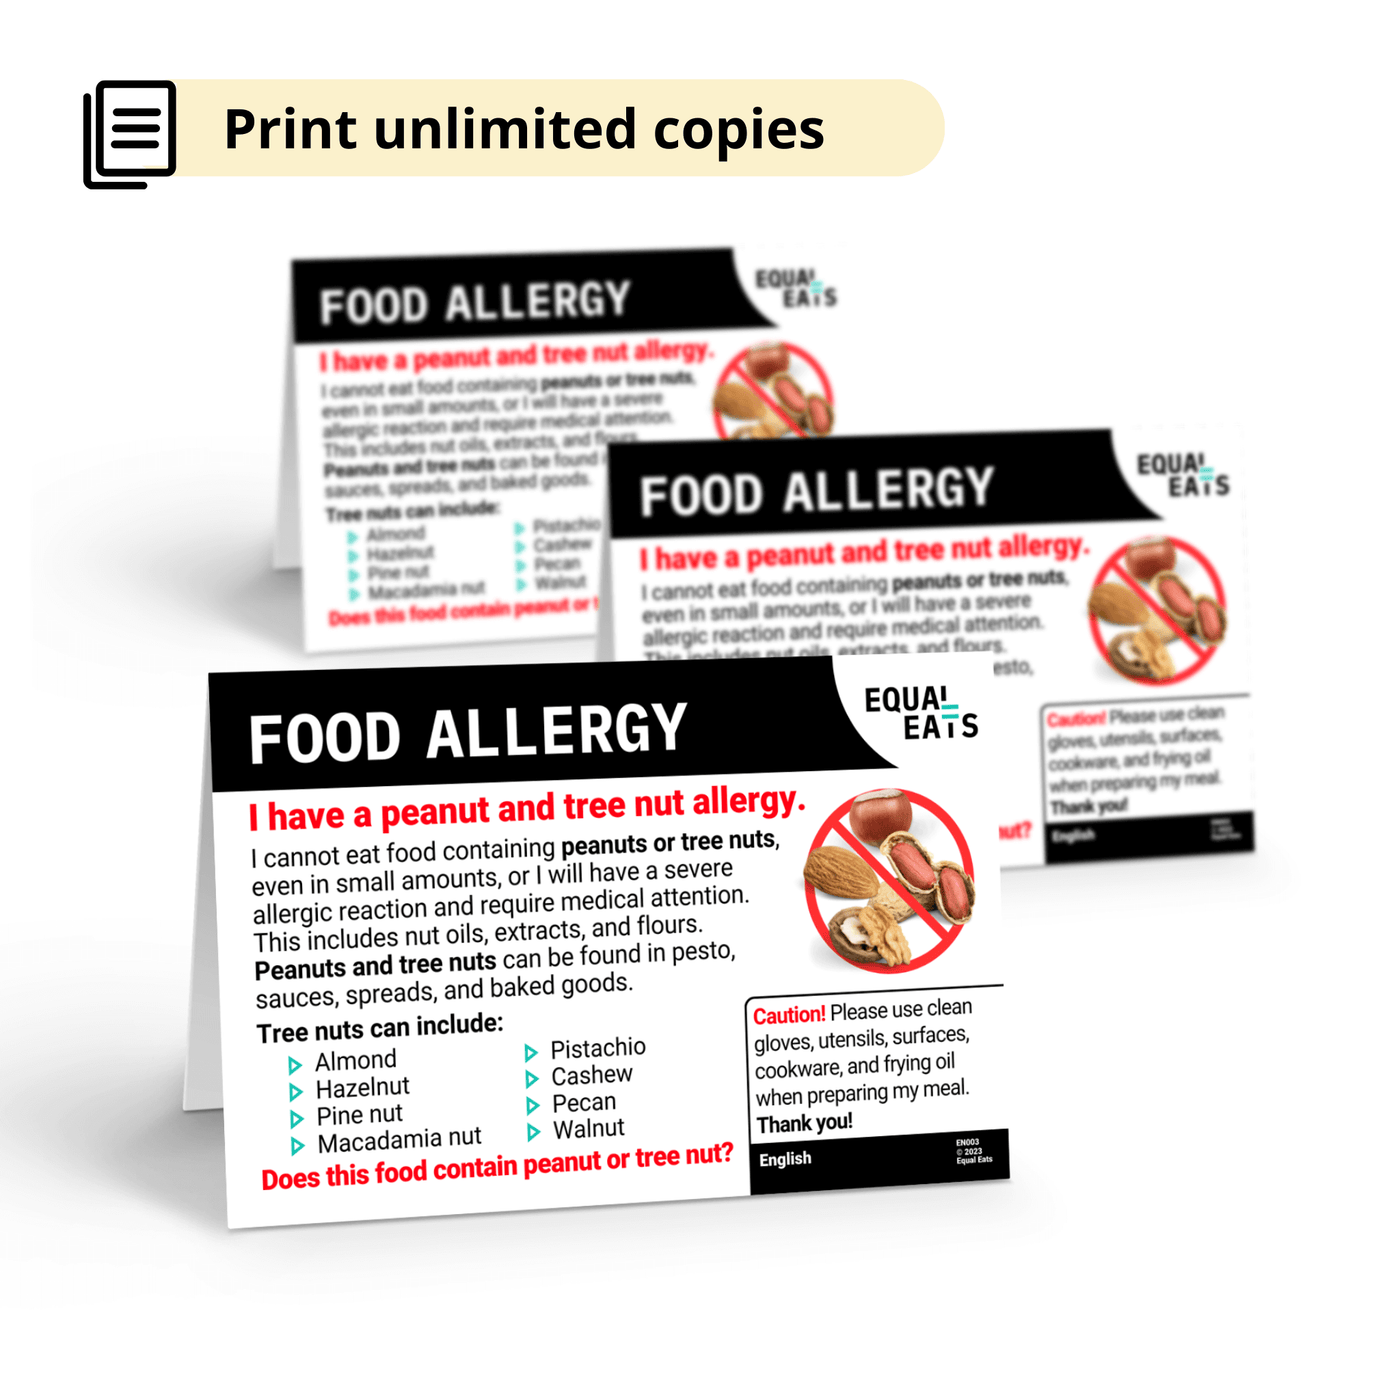 Printable Peanut and Tree Nut Allergy Card in Russian